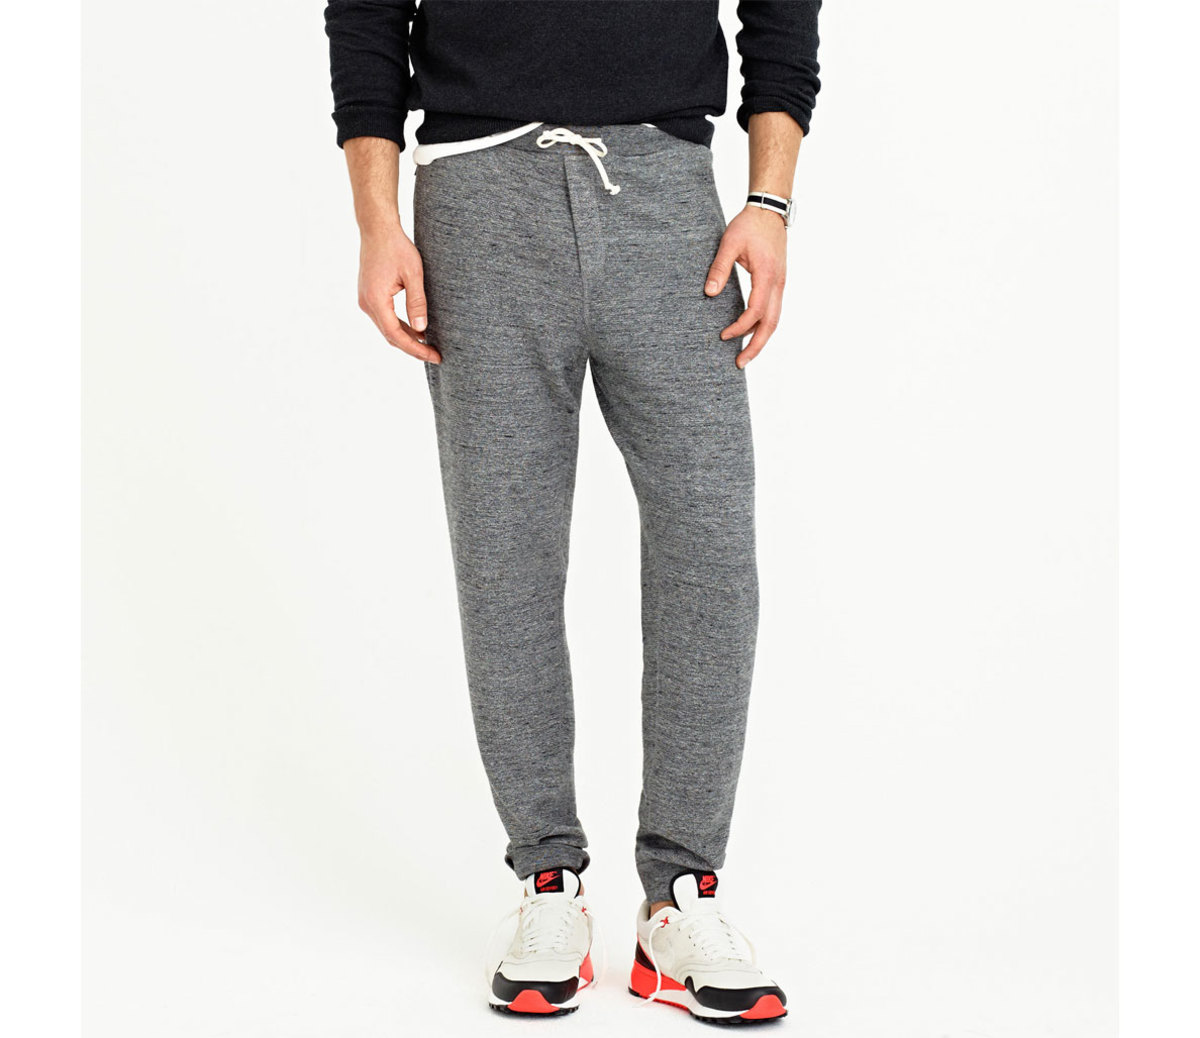 Editor Obsession Jogger Pants - Men's Journal